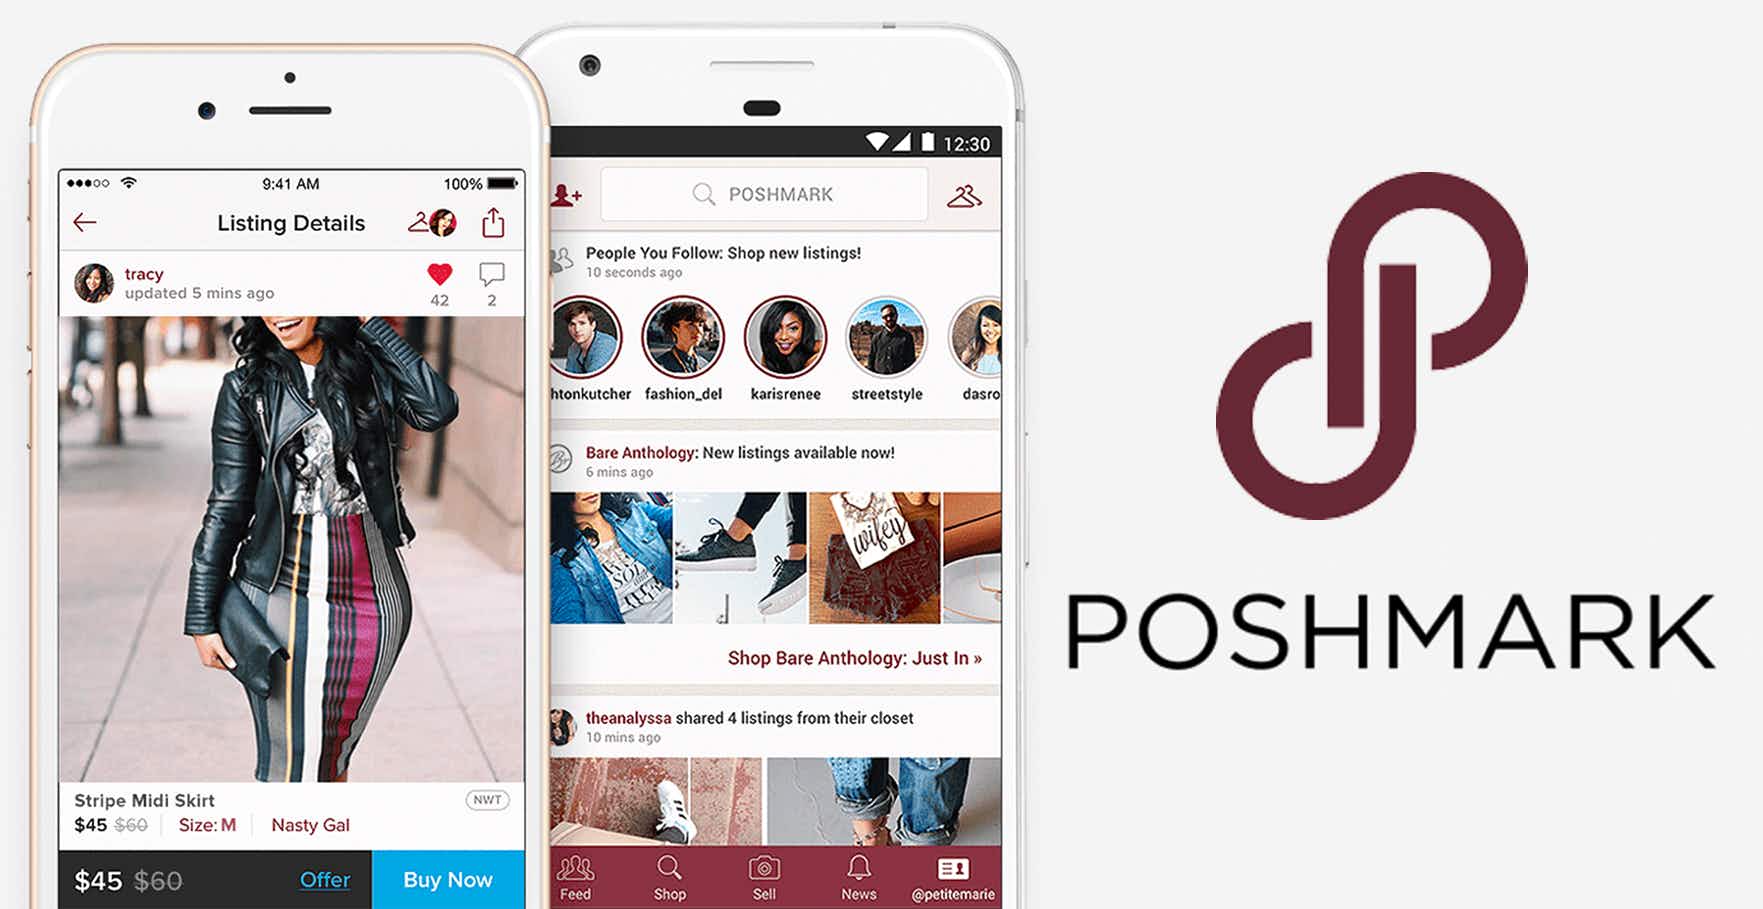 A graphic of two phones displaying the Poshmark app next to the Poshmark logo